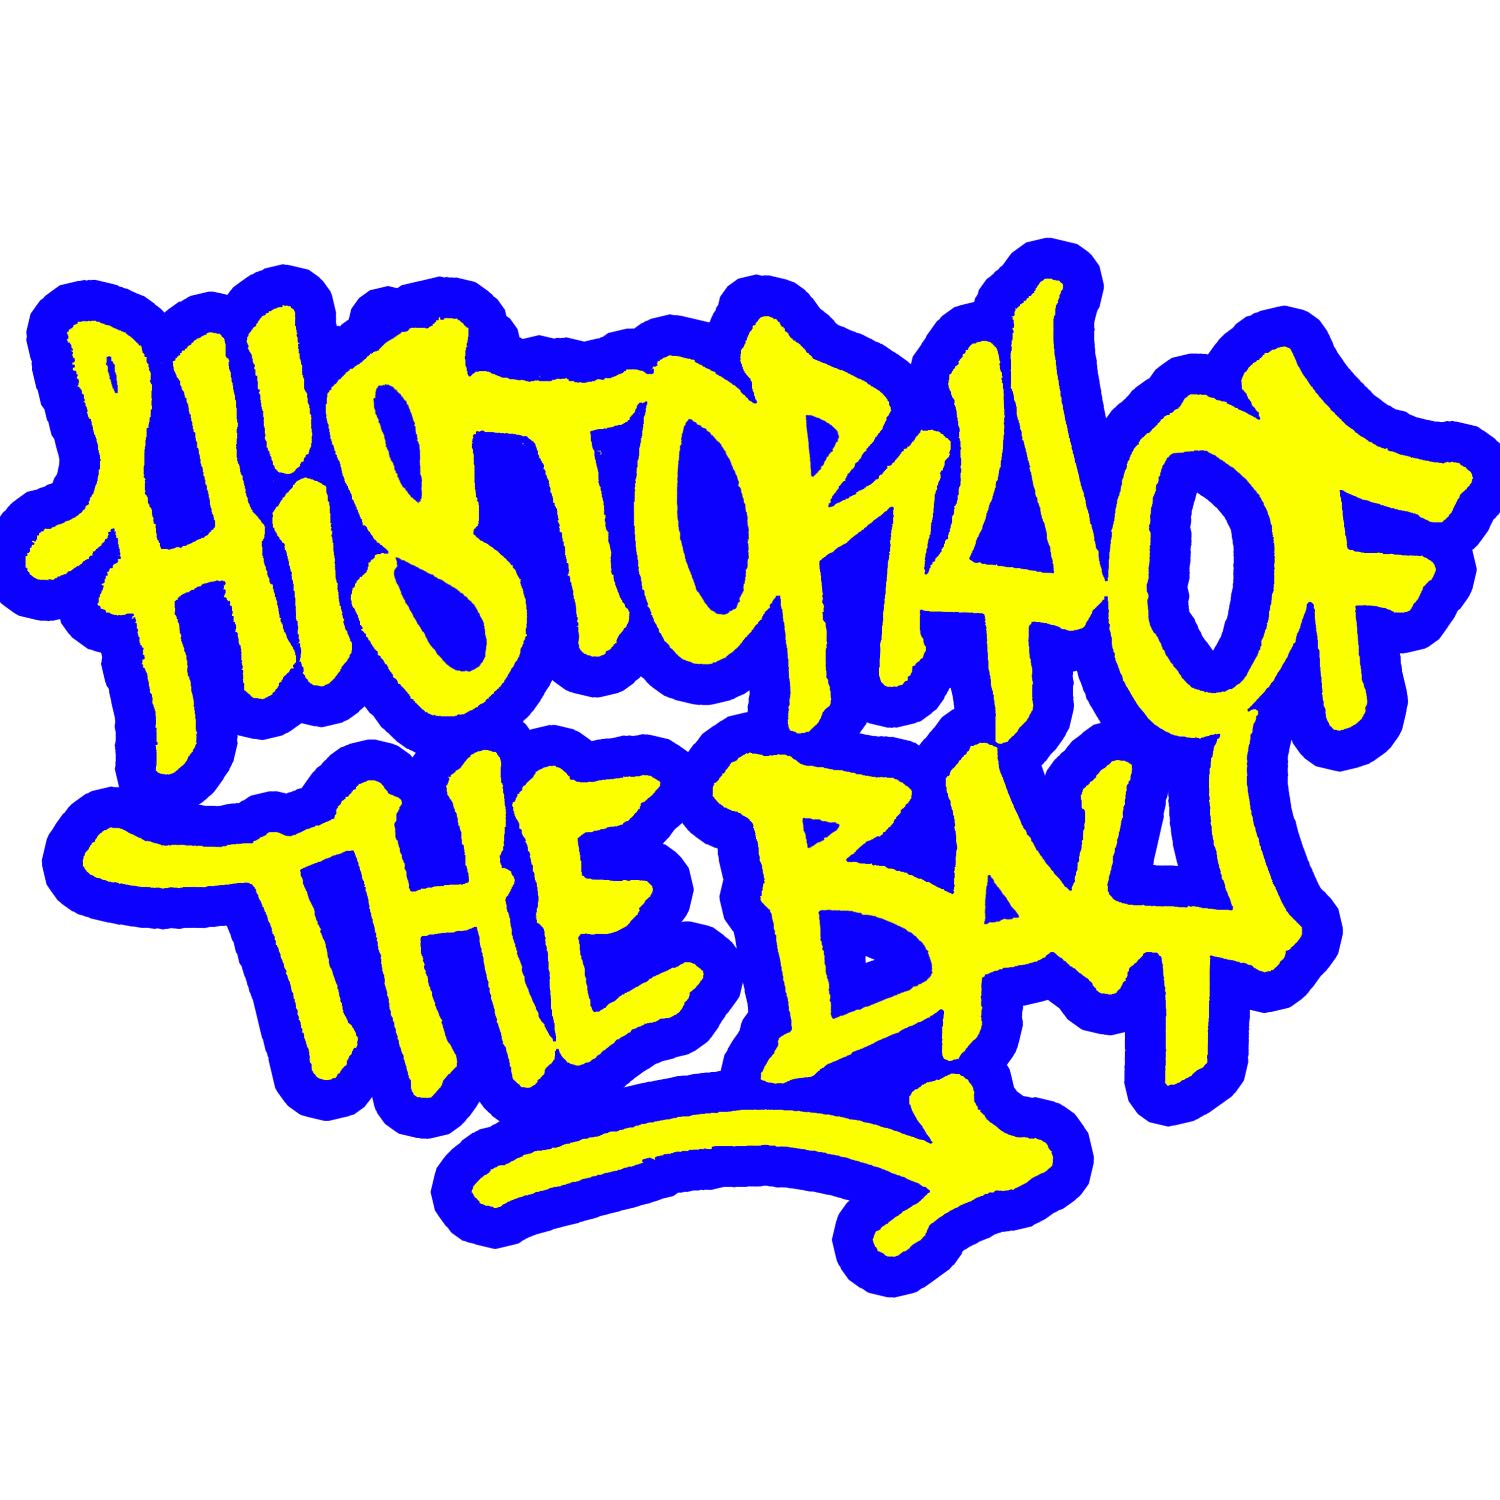 History of the Bay